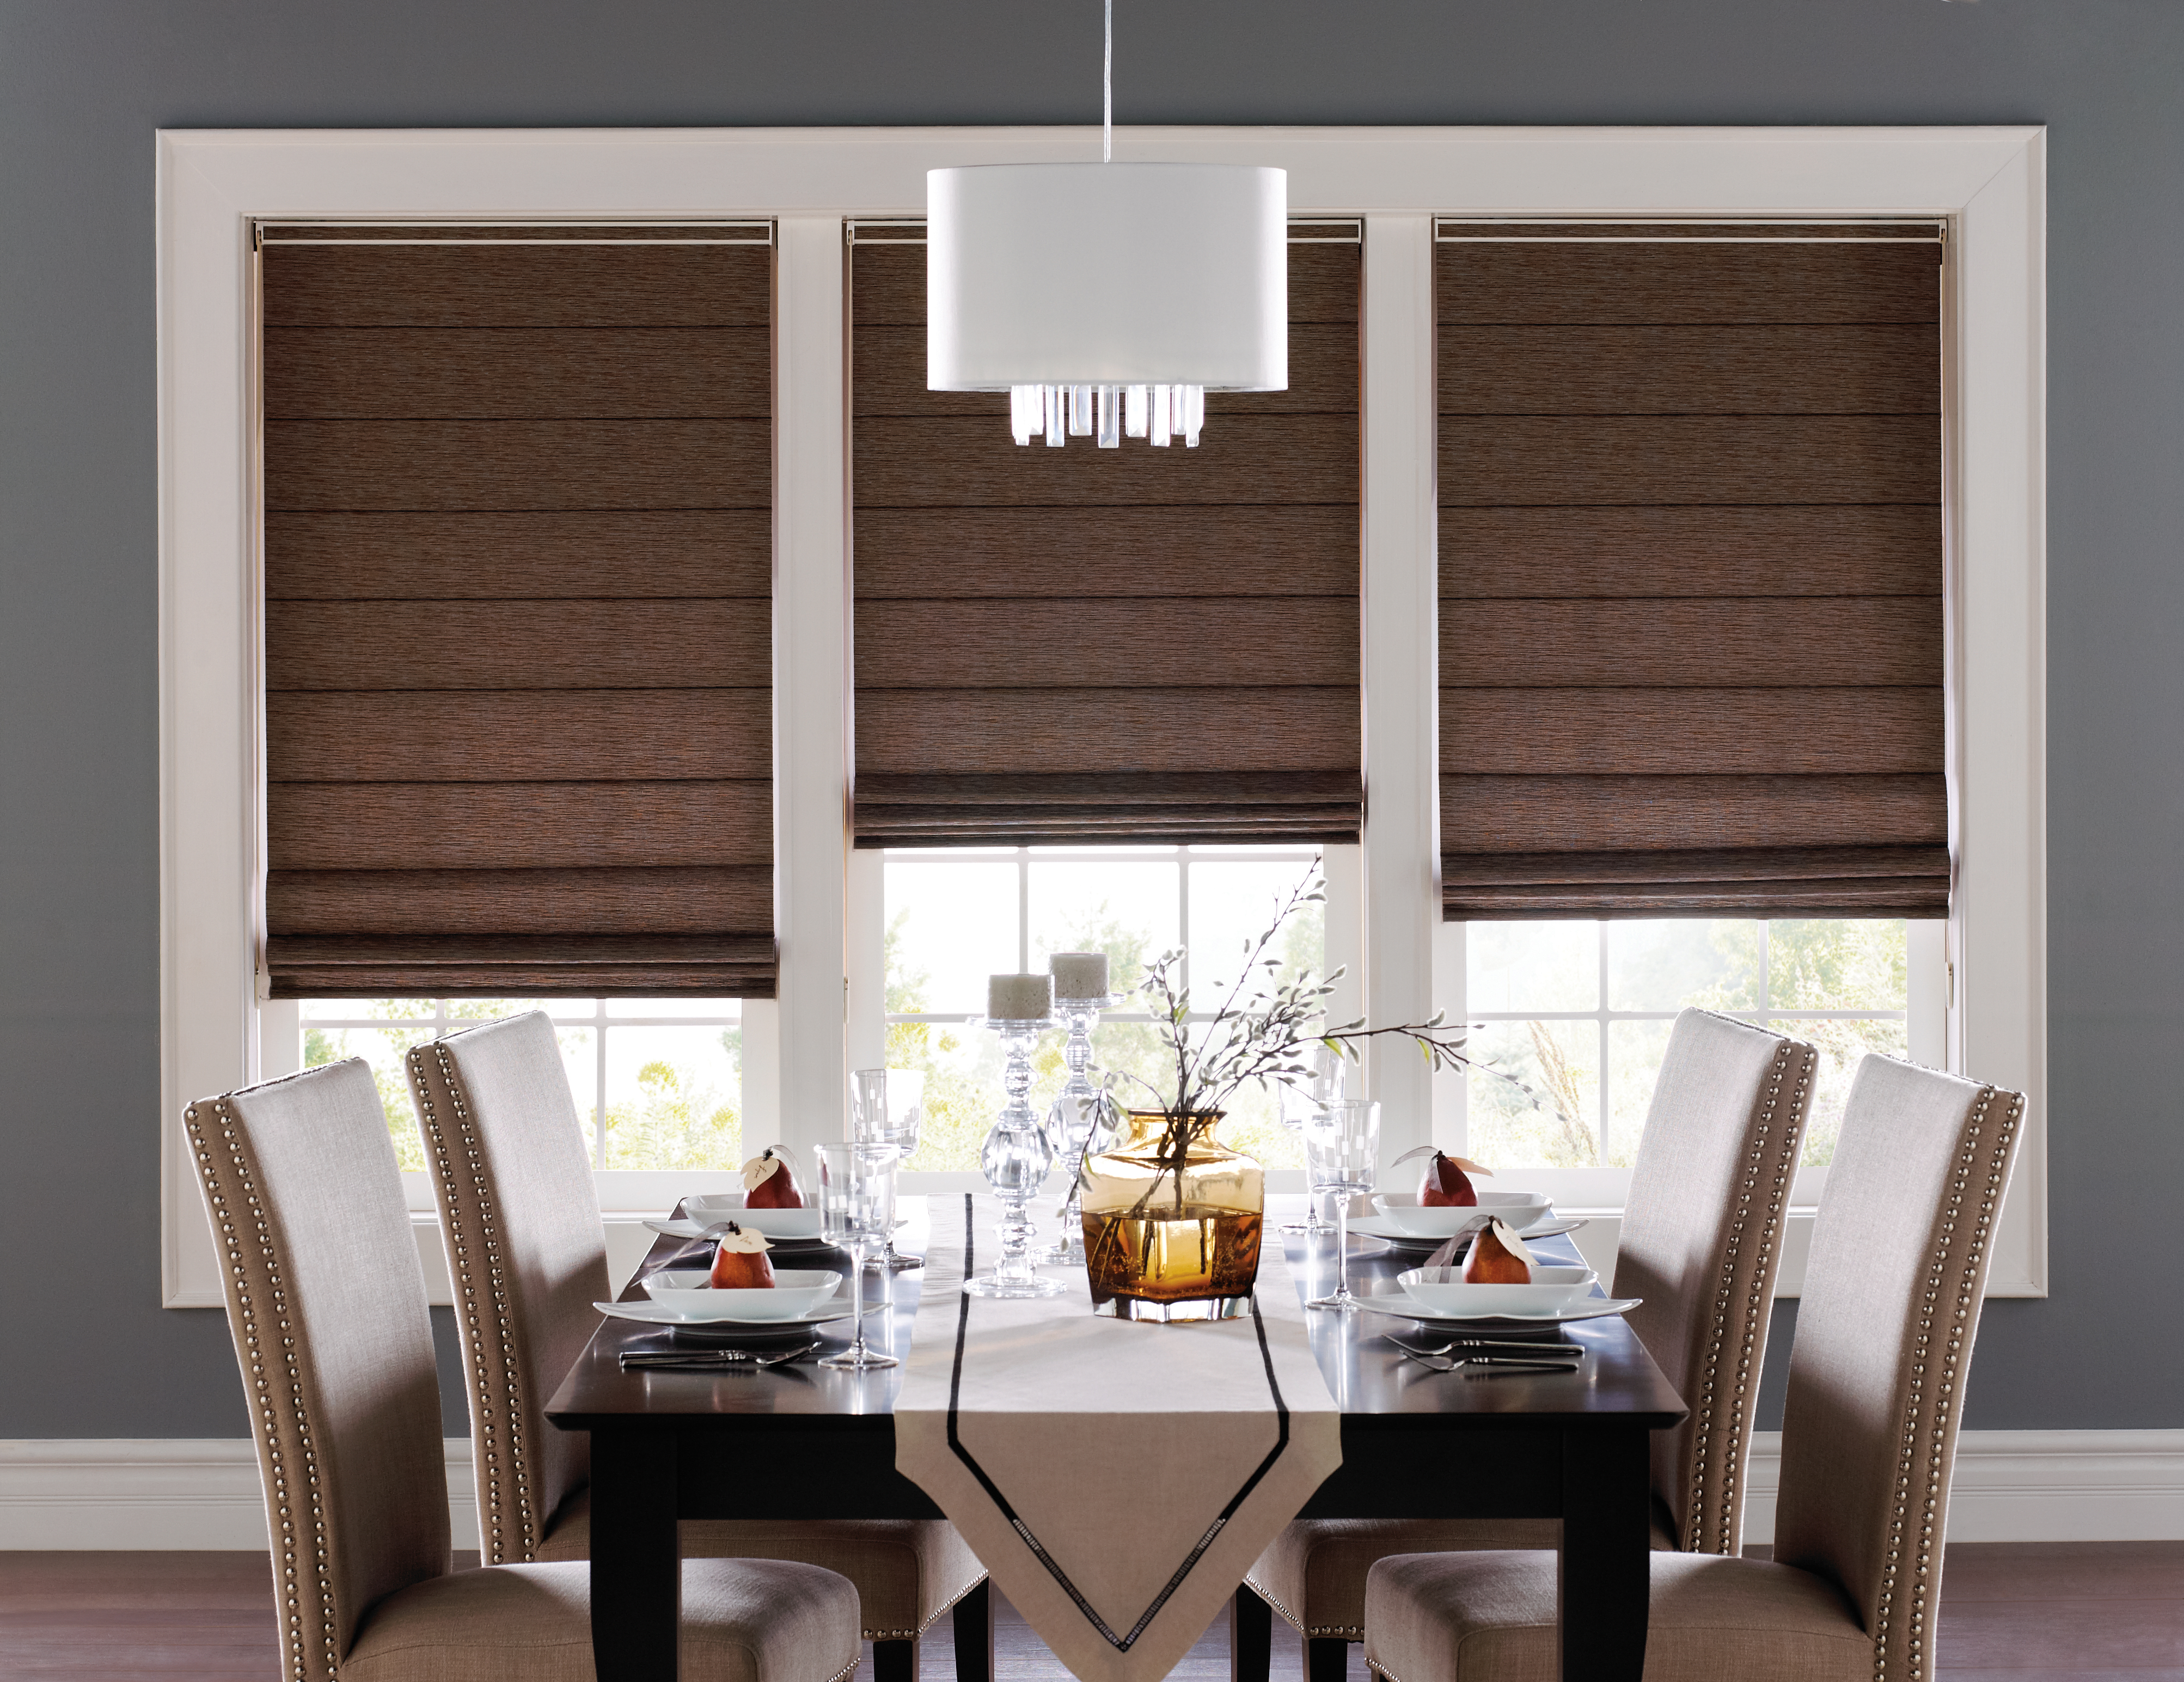 Window Roman Shades Ideas: Transform Your Home with These Creative ...